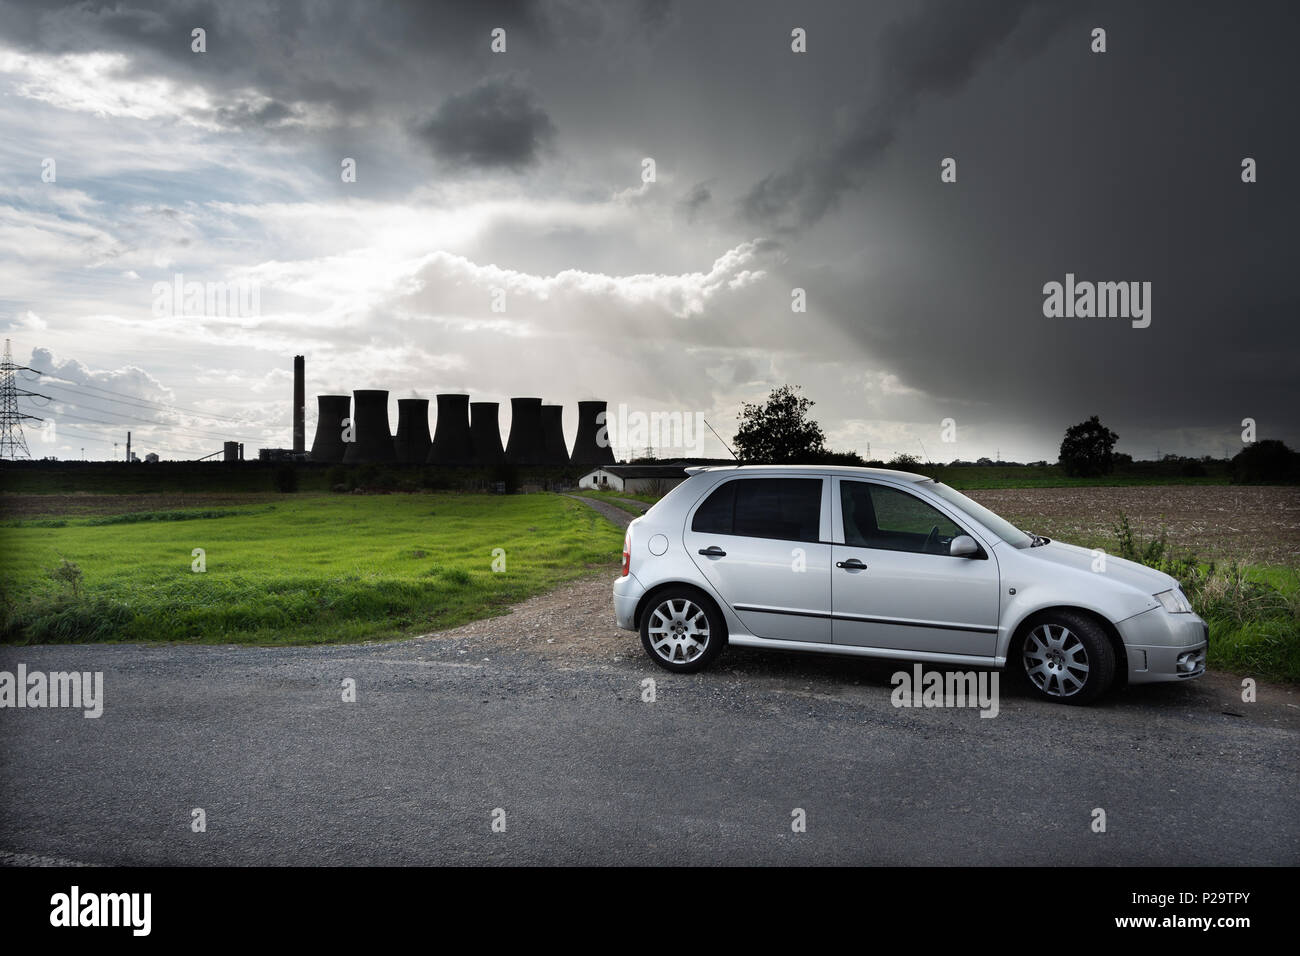 Skoda Fabia VRS in from of Eggborough power station under a stormy sky Stock Photo